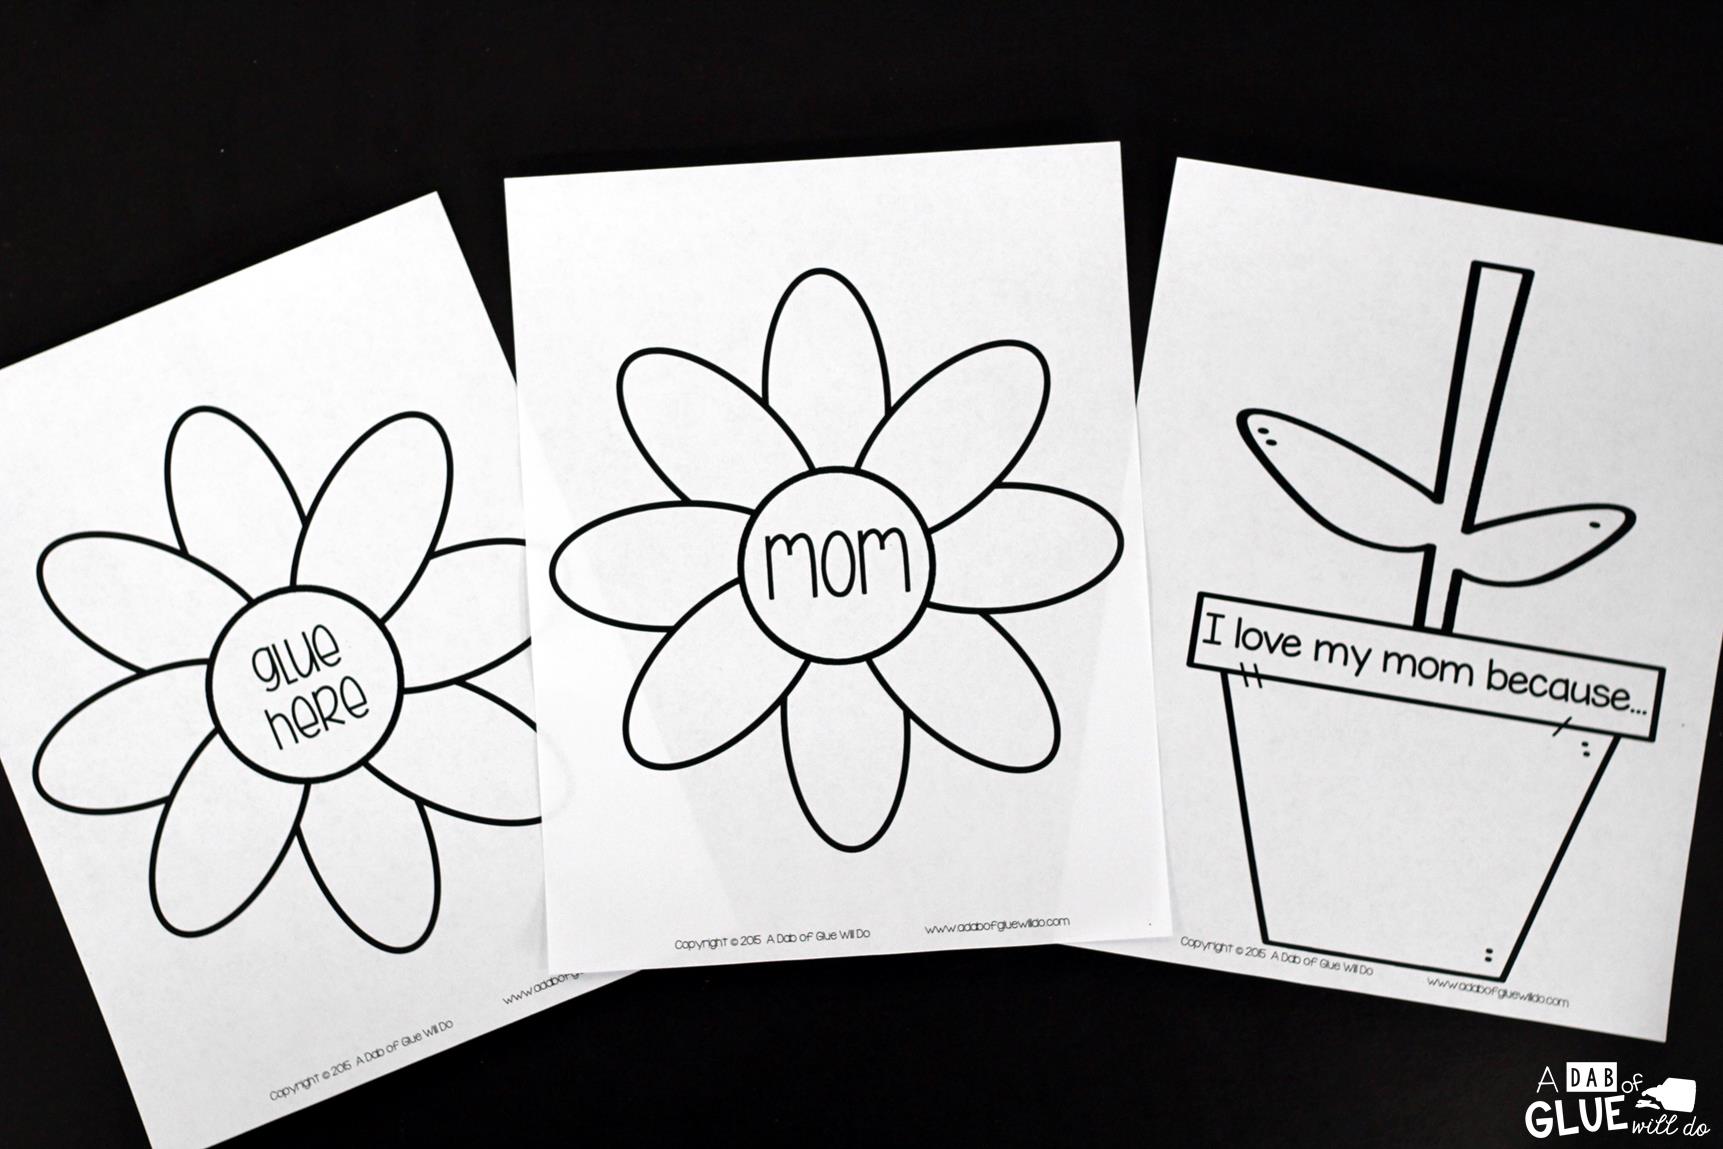 Show your mom love today with Mother's Day flower gift! Easy kids craft for spring and Mom! Use in your lower elementary classrooms from Kindergarten to Fifth Grade. Practice fine motor work, following directions, and flower vocabulary in one great craft for kids.